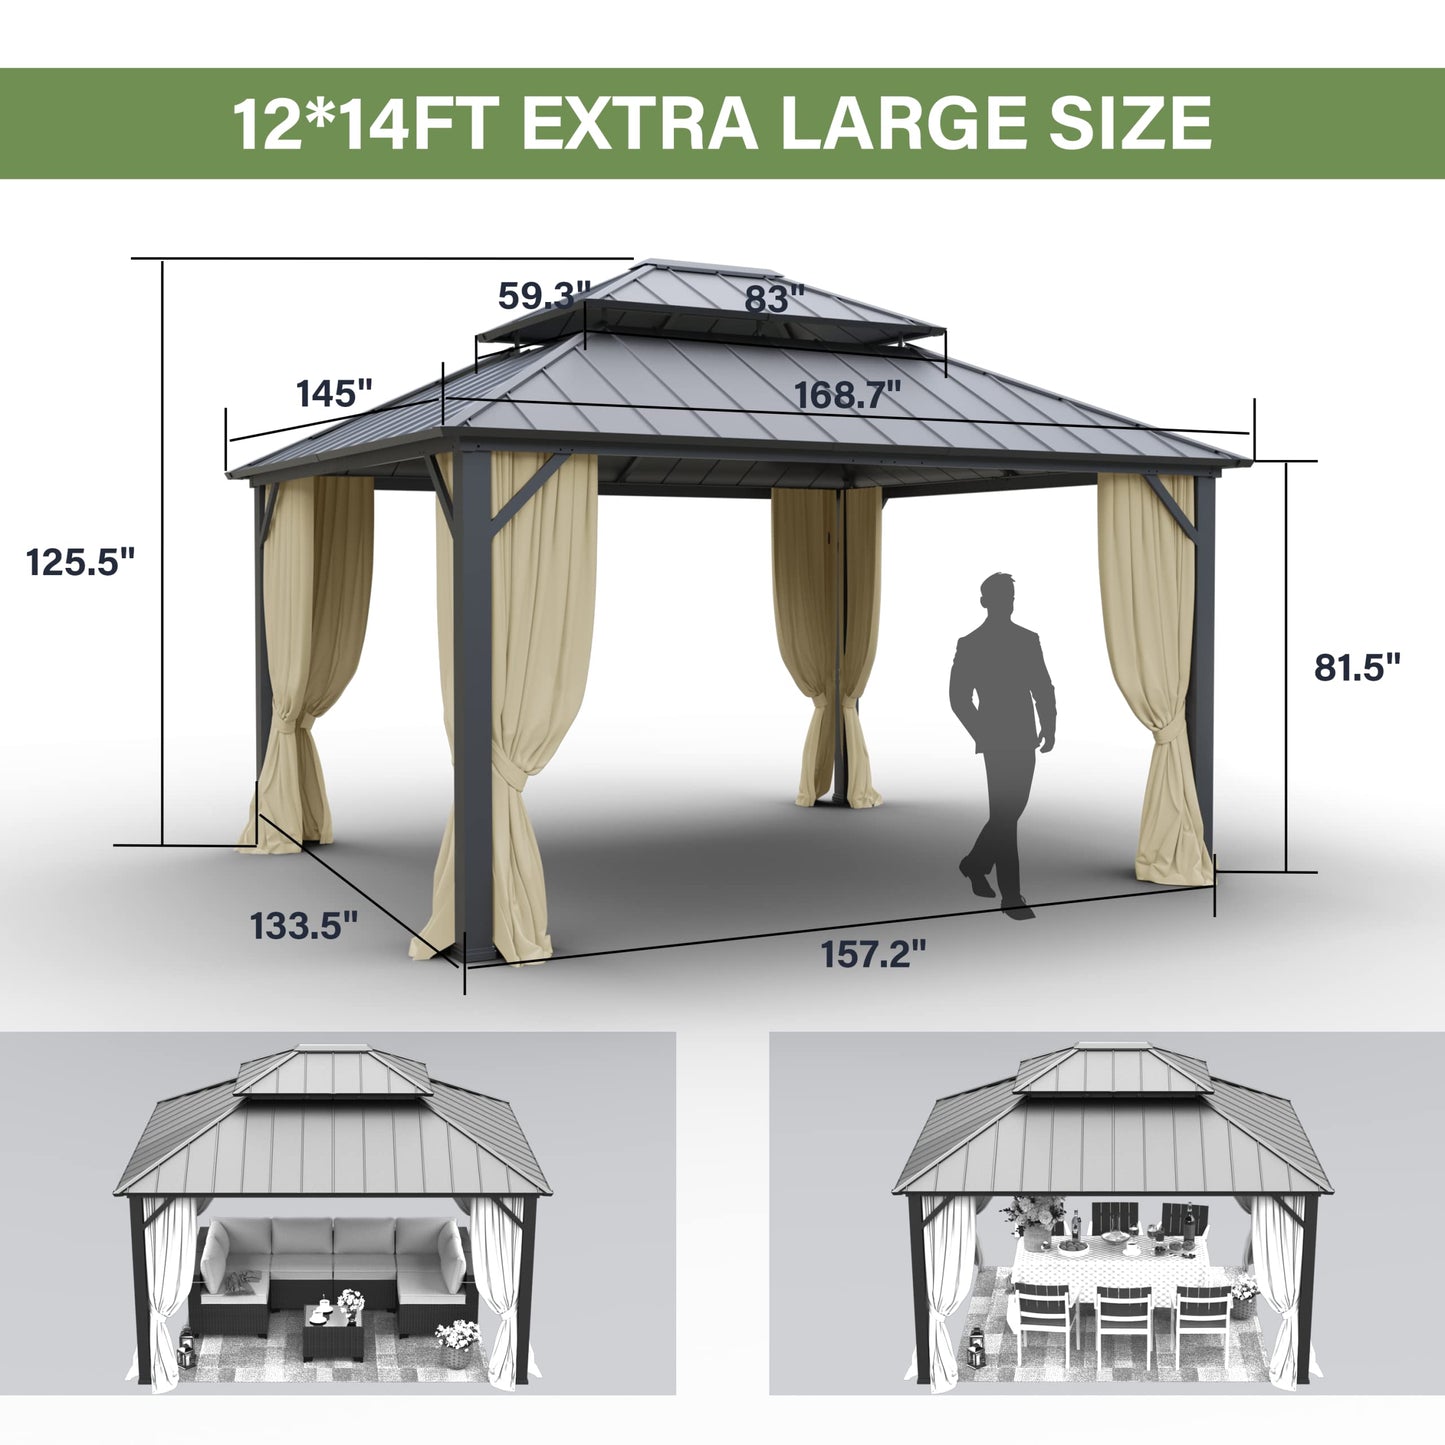 12' x 14' Hardtop Gazebo,Outdoor Galvanized Steel Metal Double Roof Gazebo with Curtains and Netting for Patios,Gardens, Lawns,Cream